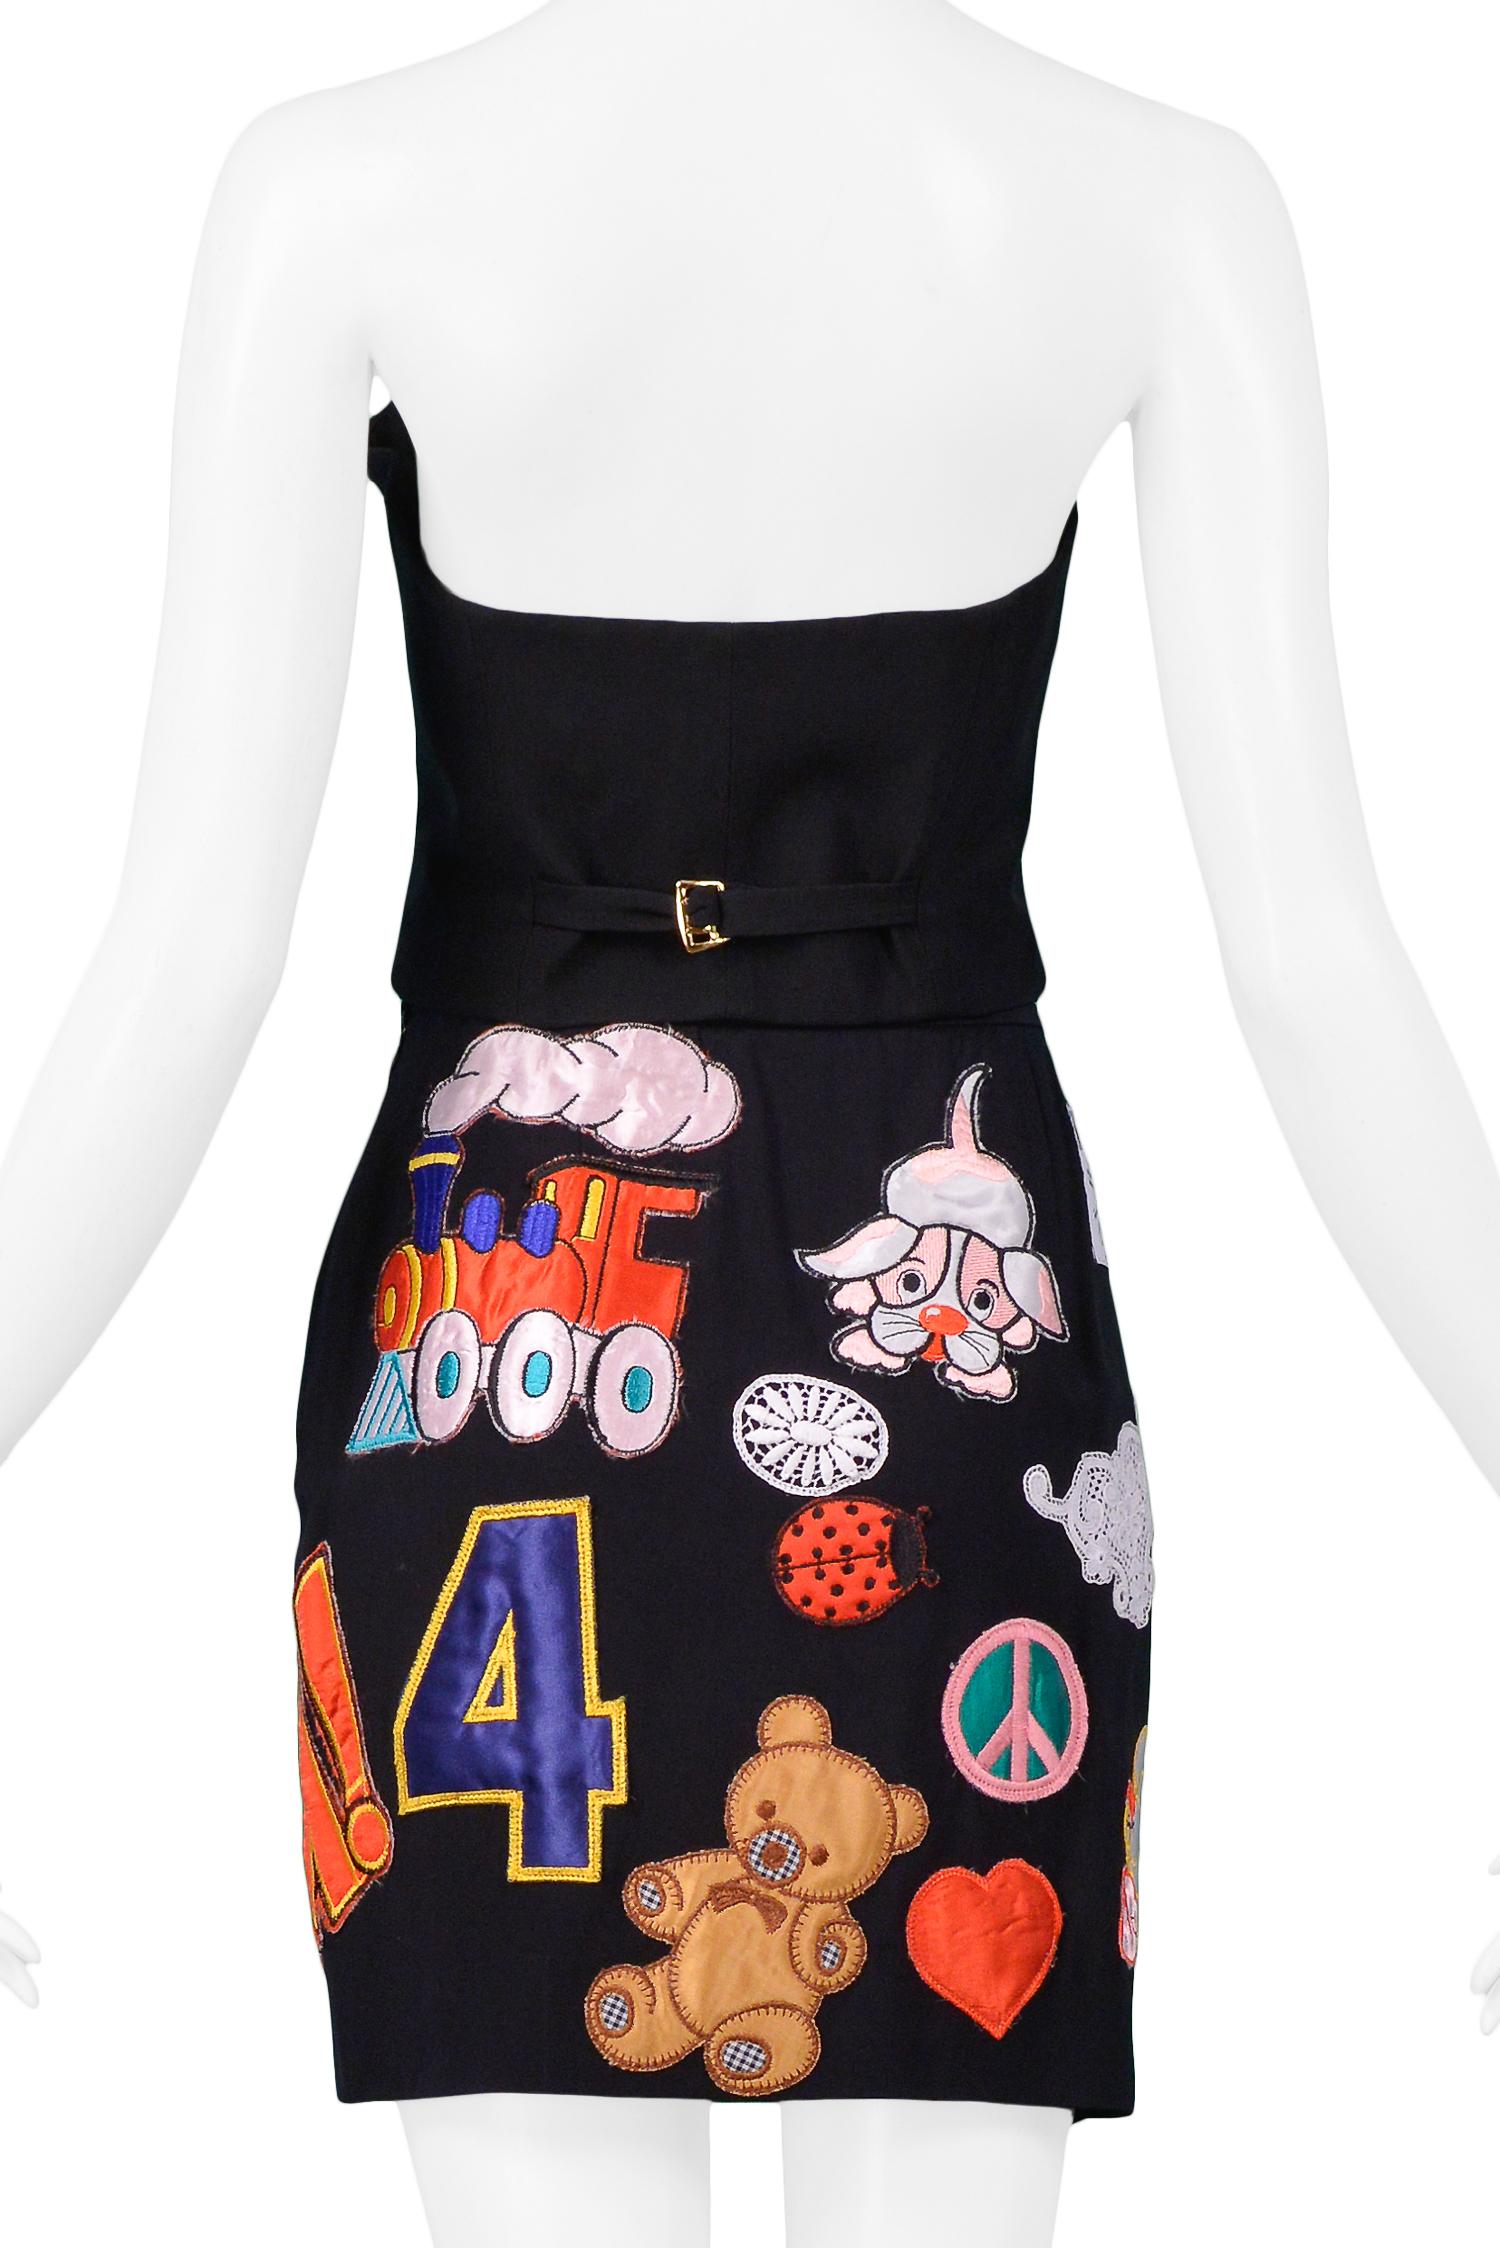 Women's Vintage Moschino Couture 1993/94 Bustier & Skirt Ensemble For Sale